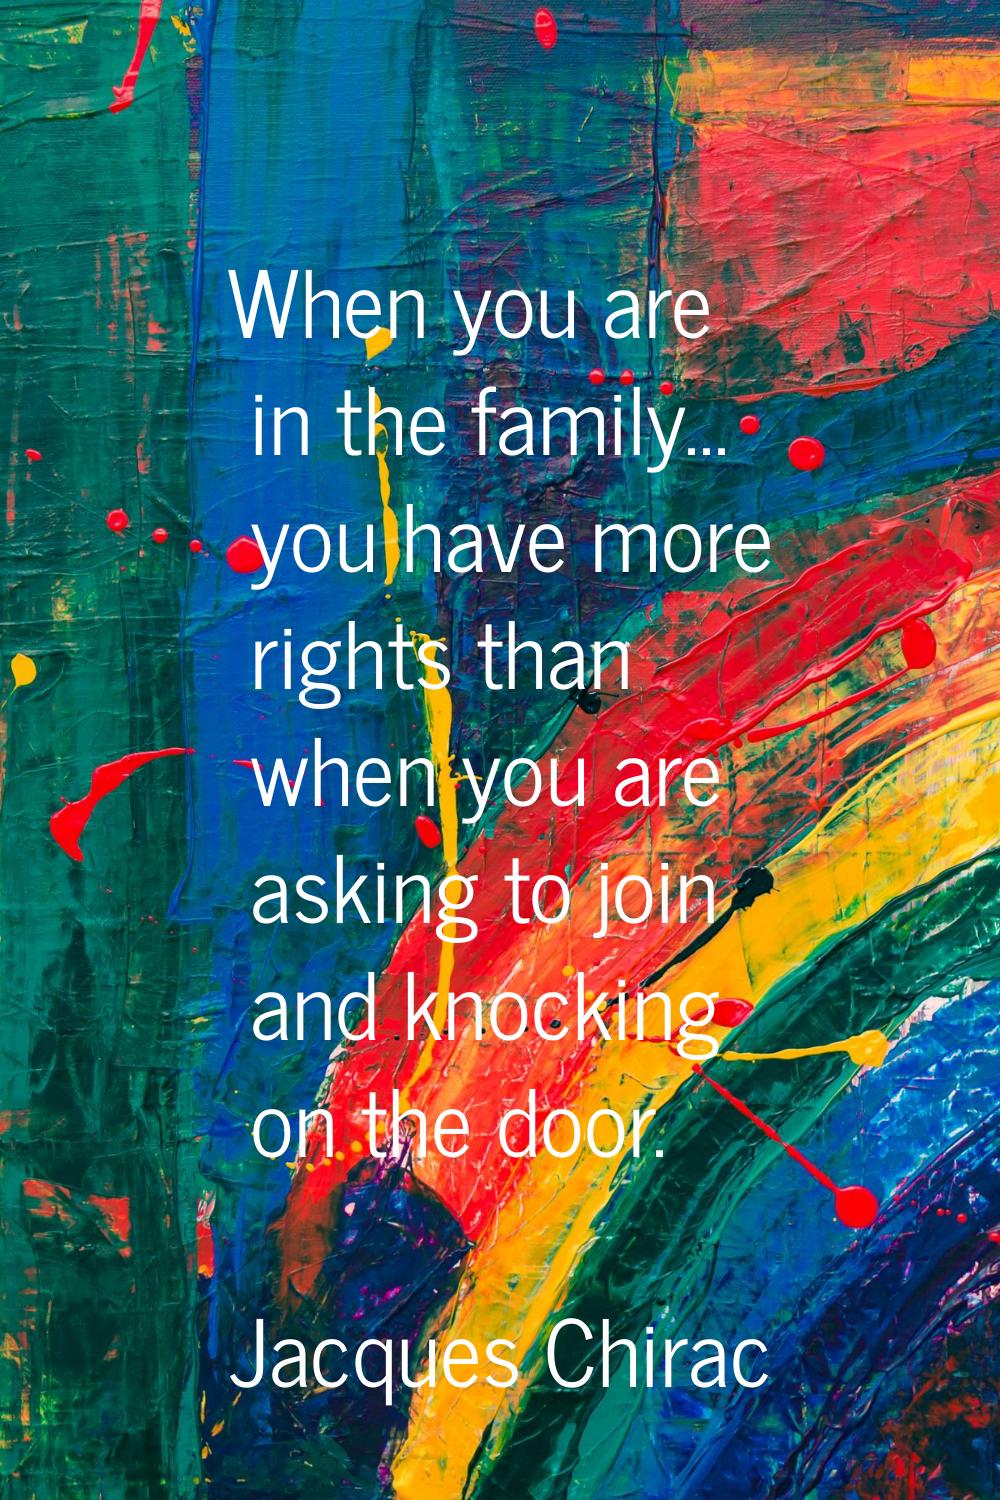 When you are in the family... you have more rights than when you are asking to join and knocking on